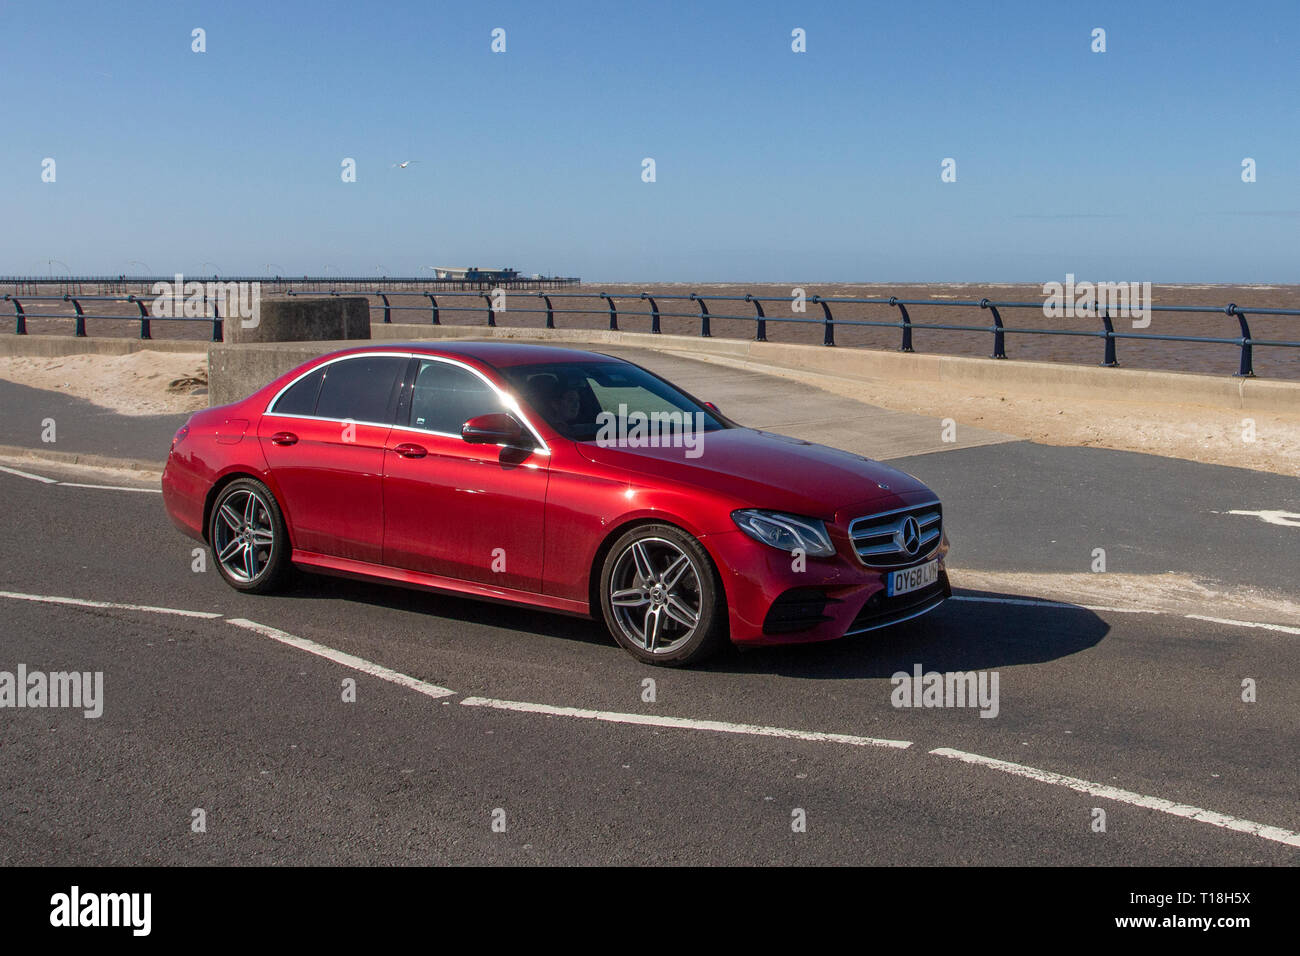 Mercedes-Benz E 220 D SE Auto driving on the seafront promenade, Marine Drive, Southport, Merseyside, UK Stock Photo